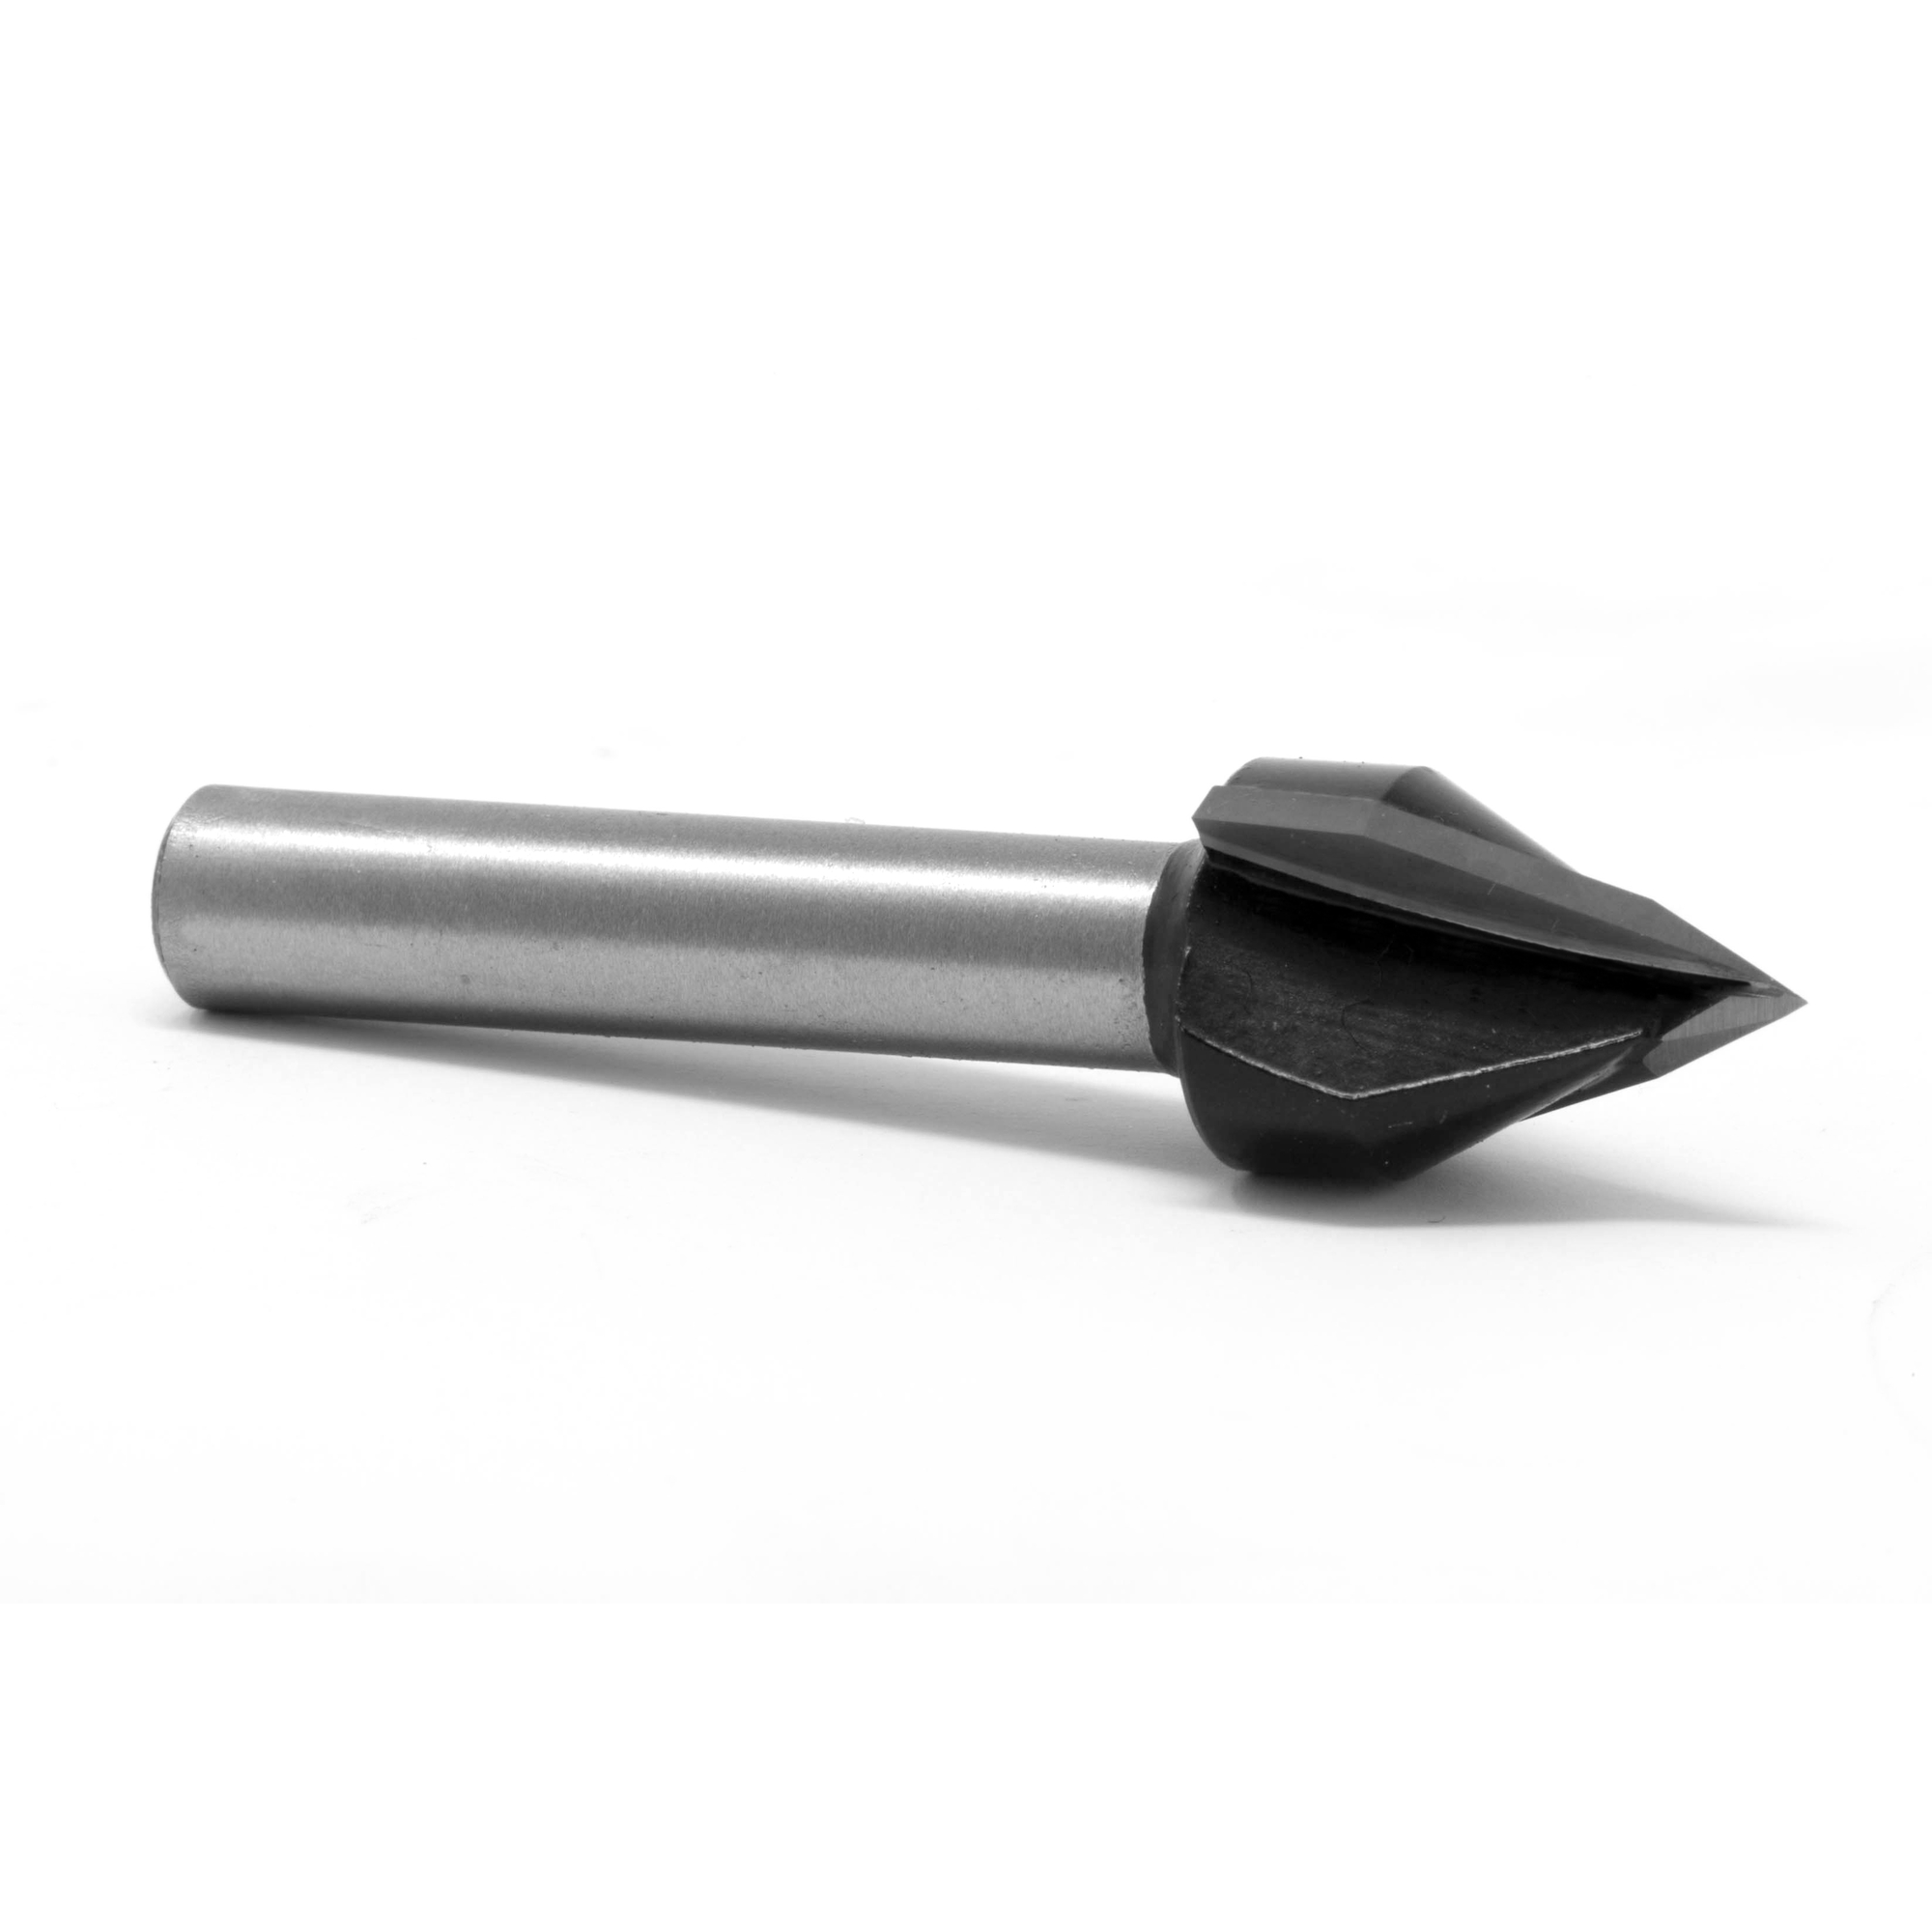 WEN, 1/2Inch V-Groove Carbide-Tipped Router Bit, Shank Size 1/4 in, Bit Diameter 1/2 in, Model RB302VG